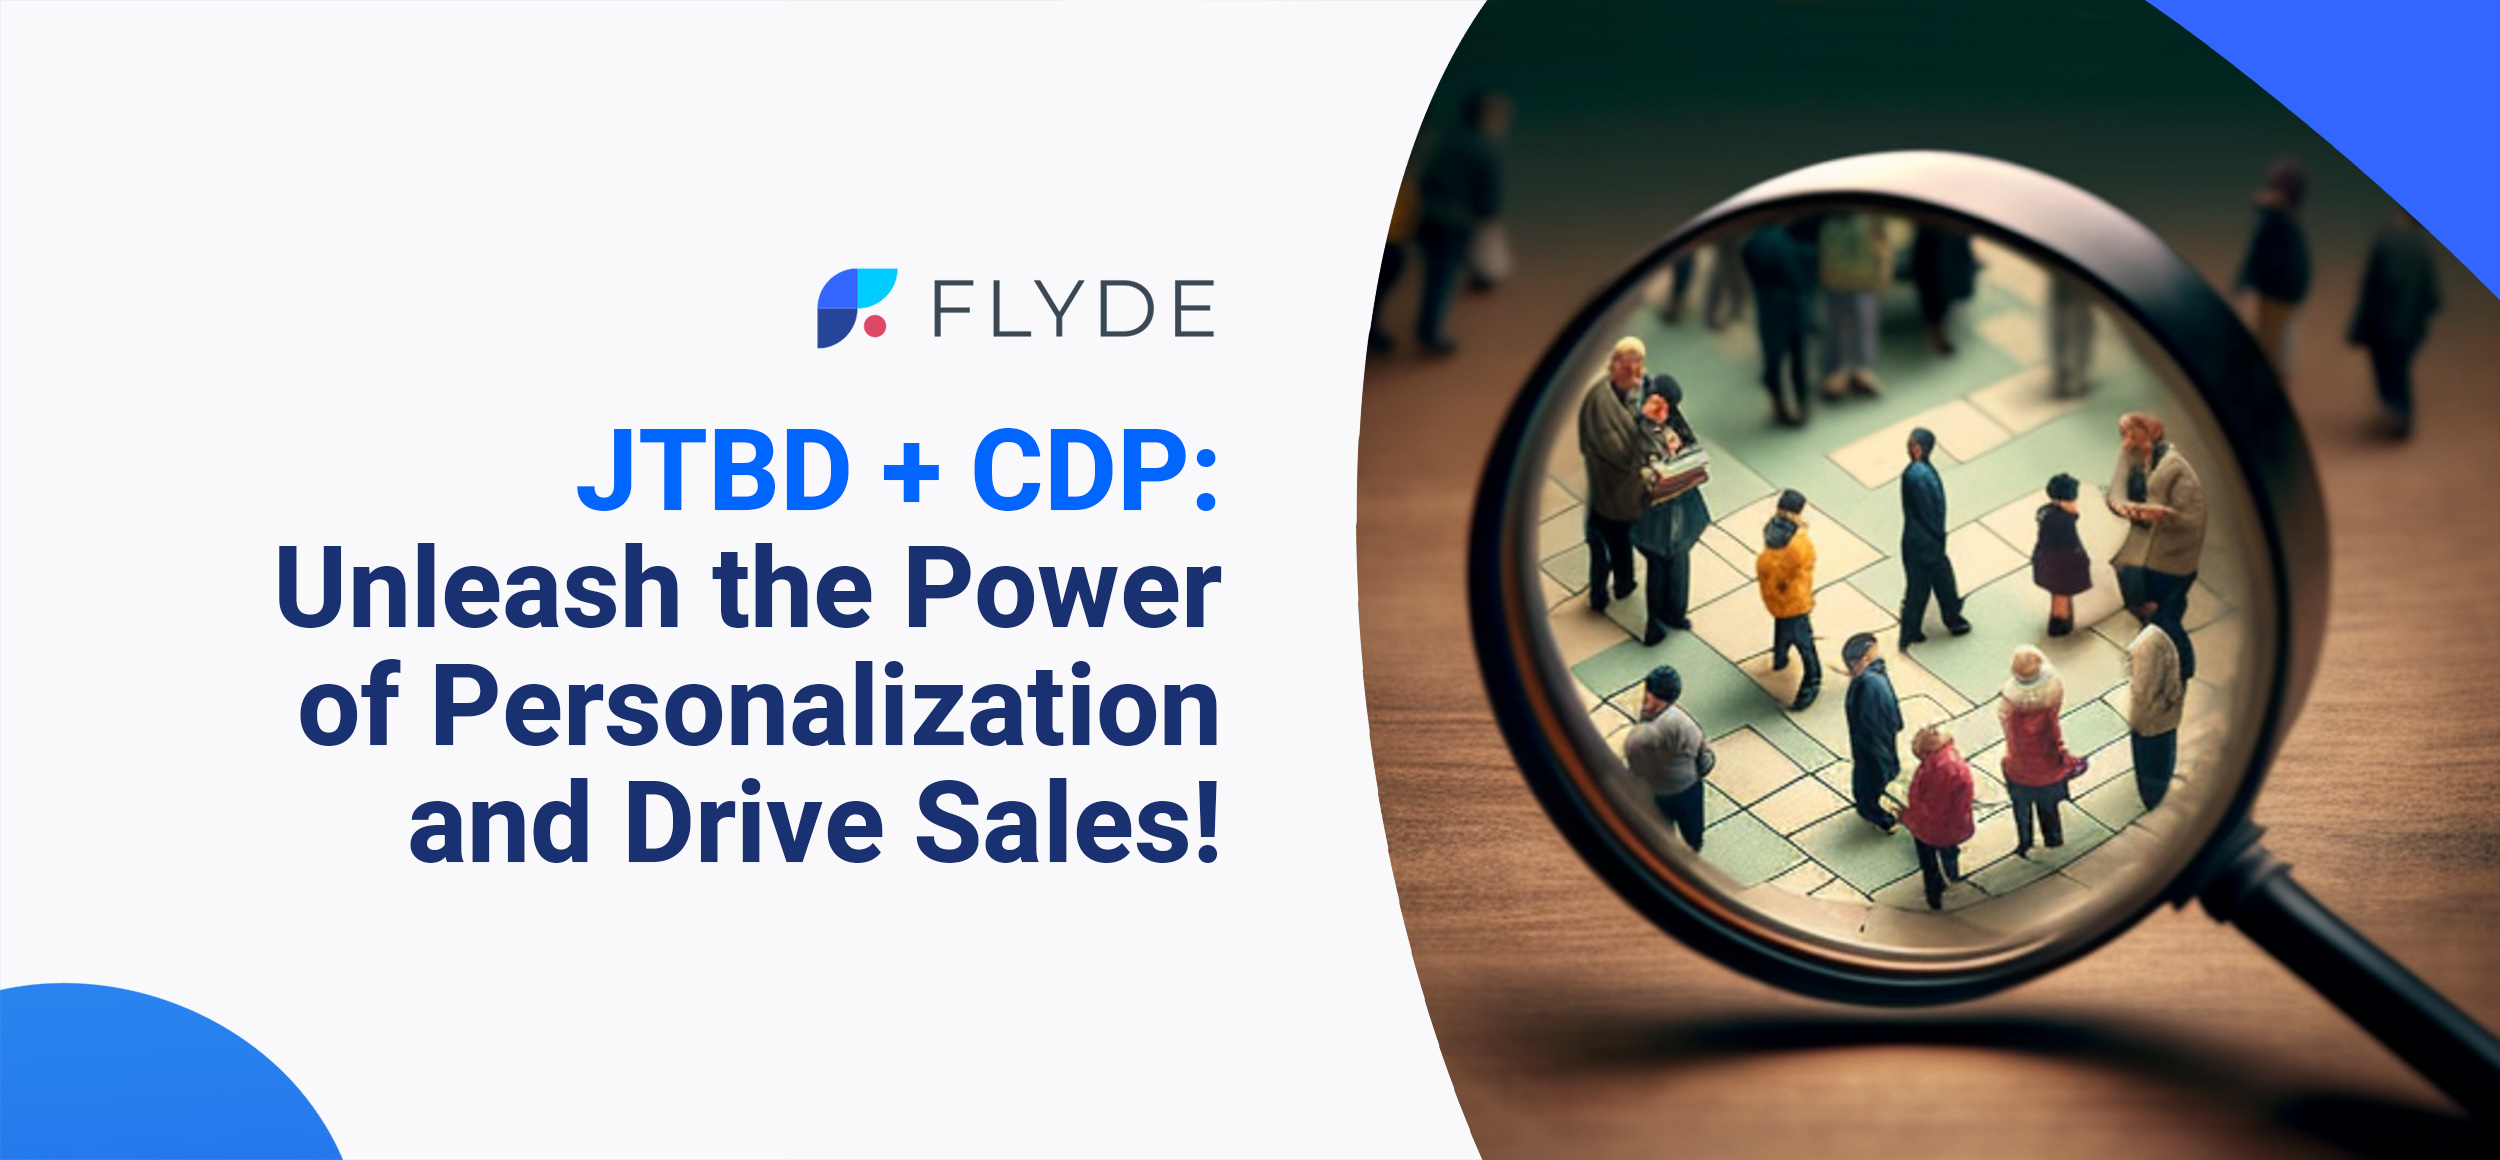 jtbd and CDP: unleash the power of personalization and drive sales!